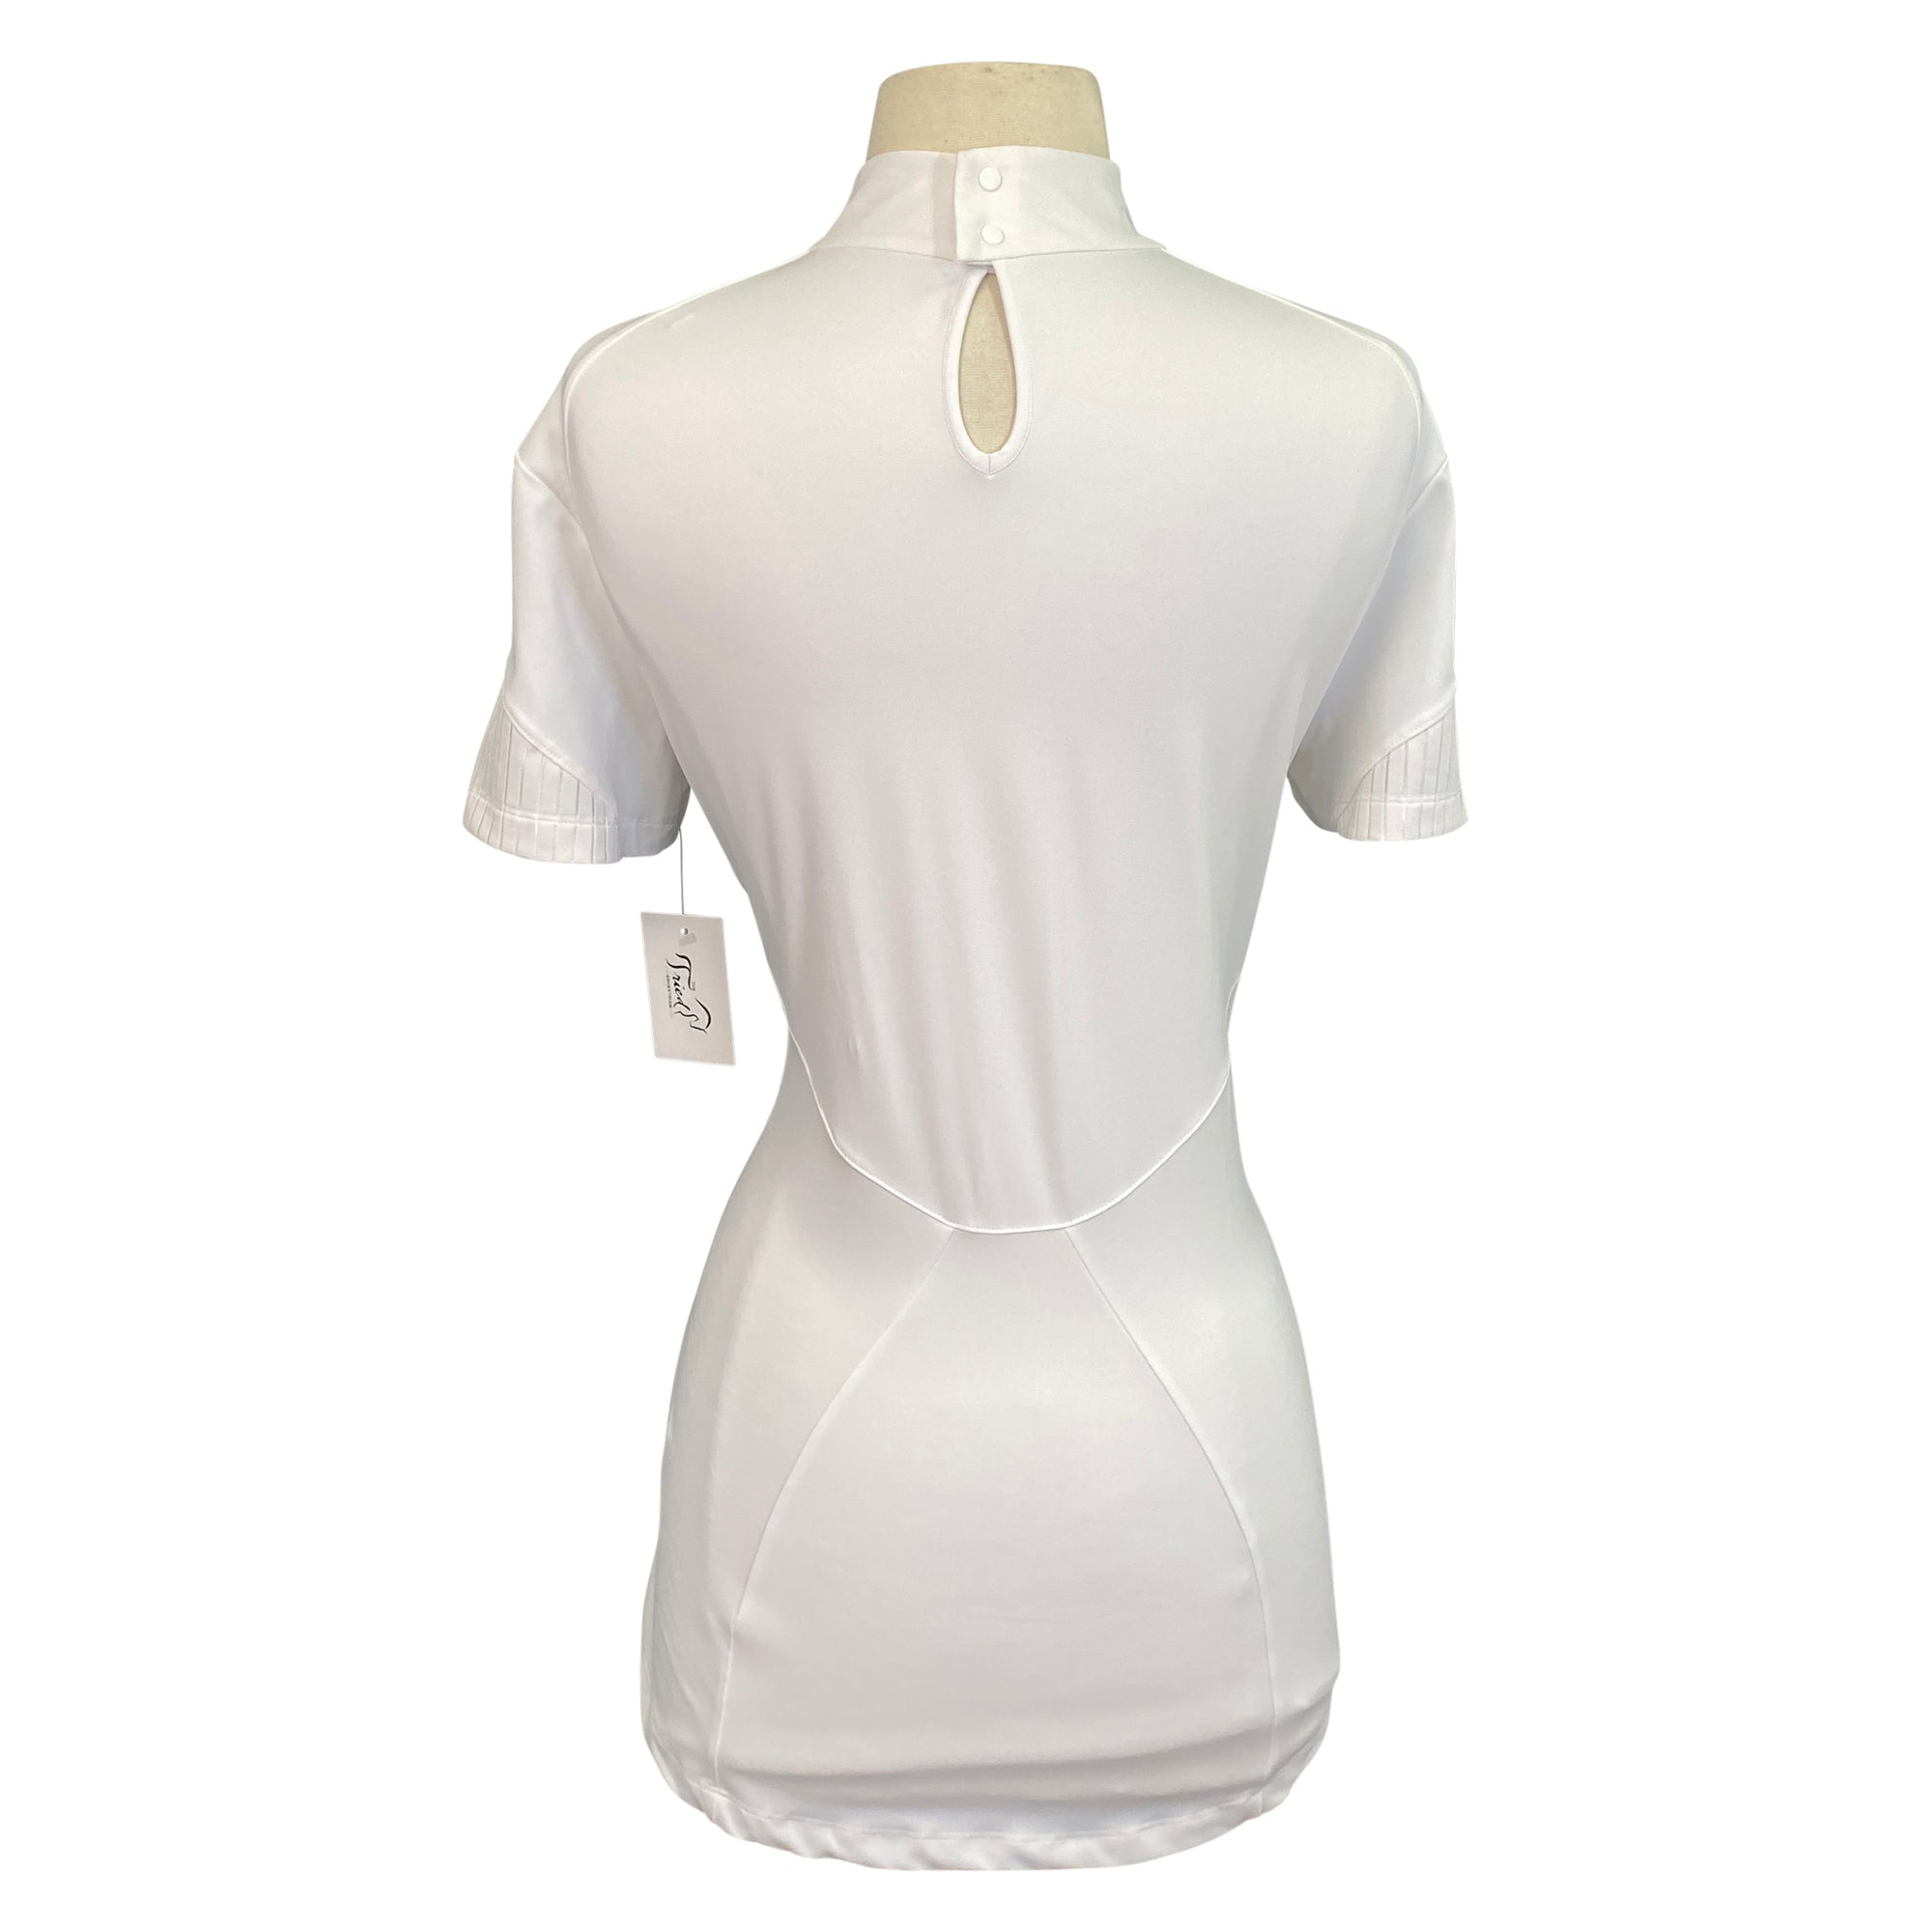 Equiline 'Megan' Show Shirt in White